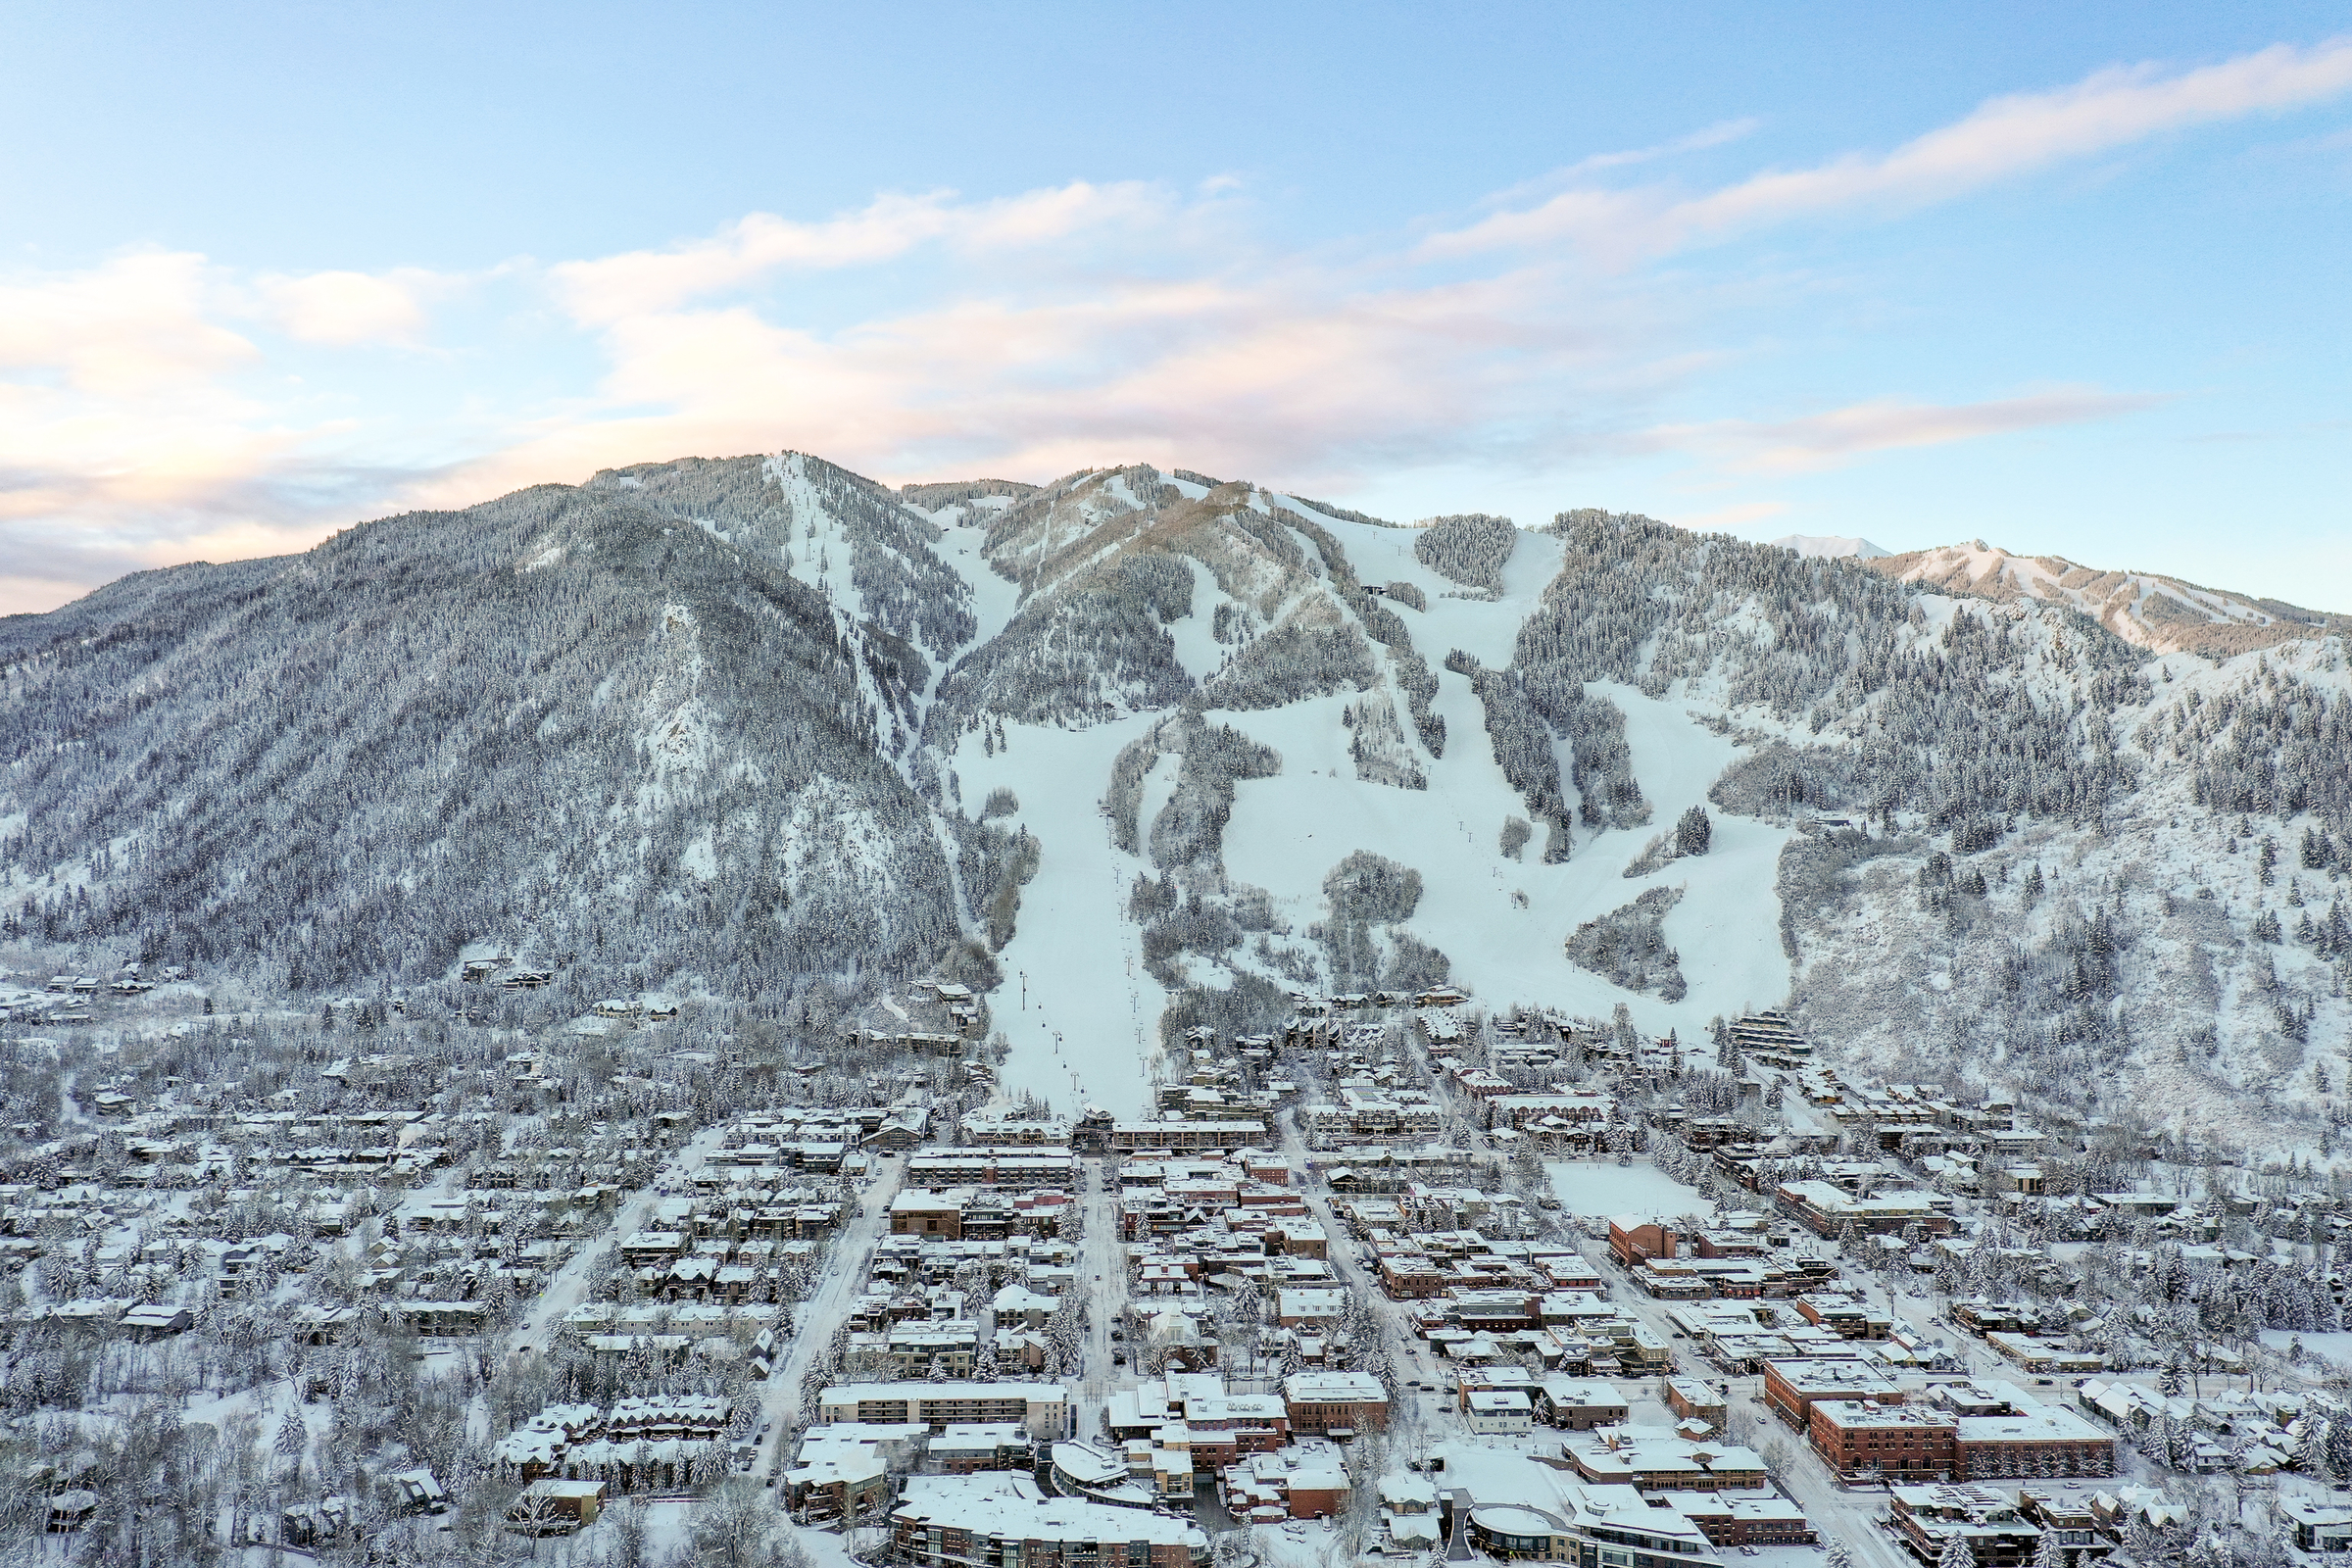 City of Aspen in the Winter with Aspen Mountain.